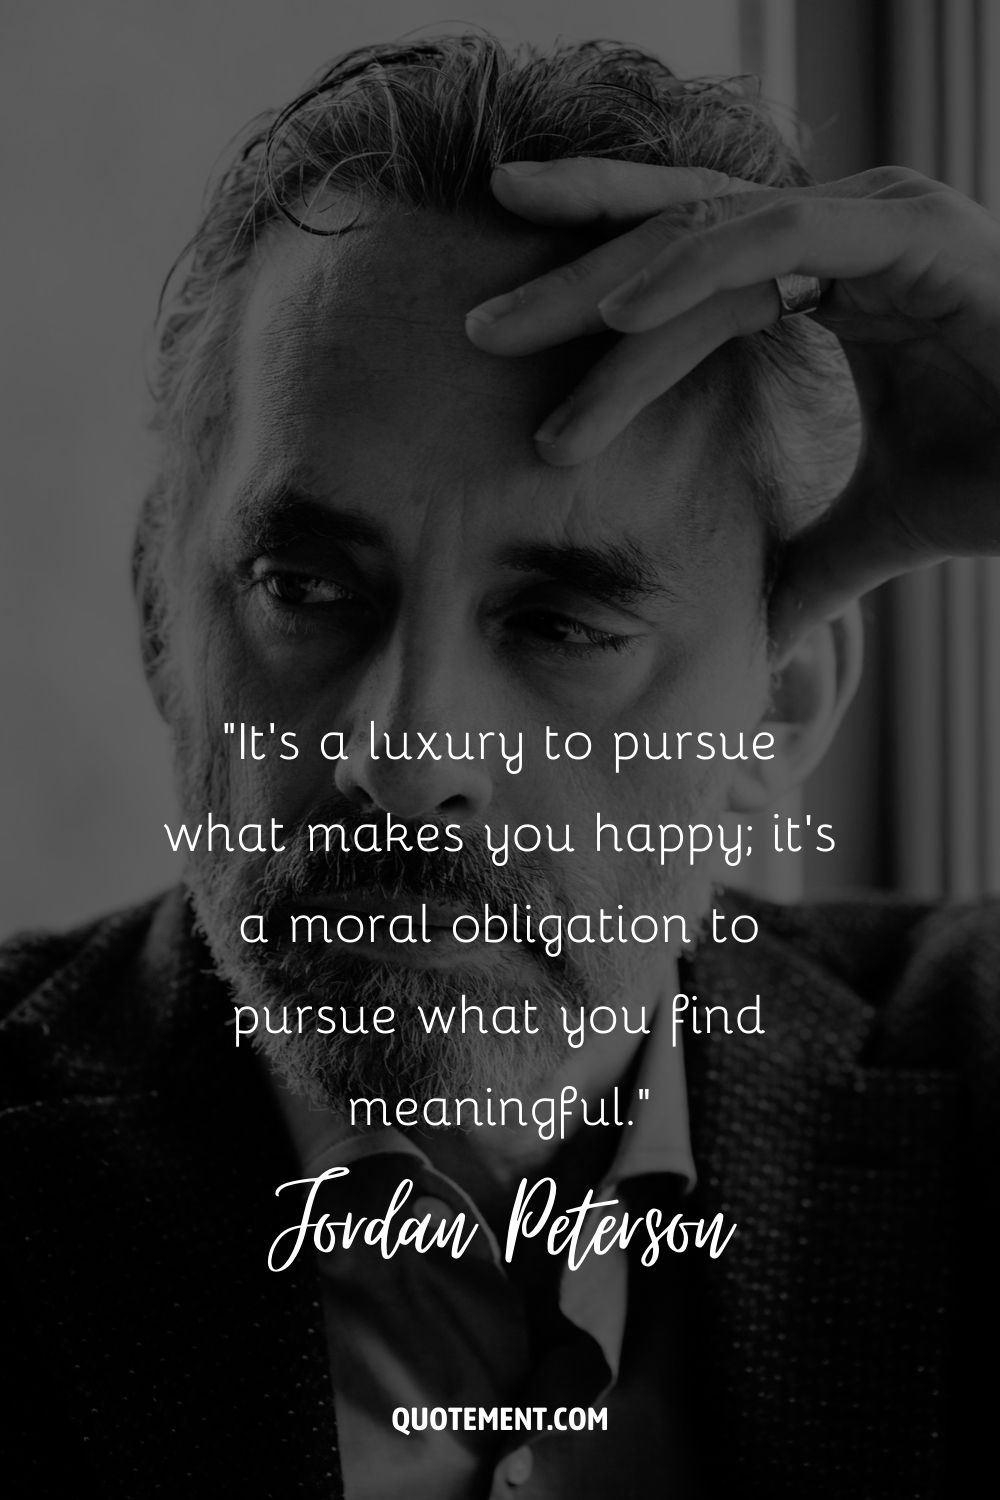 It's a luxury to pursue what makes you happy; it's a moral obligation to pursue what you find meaningful